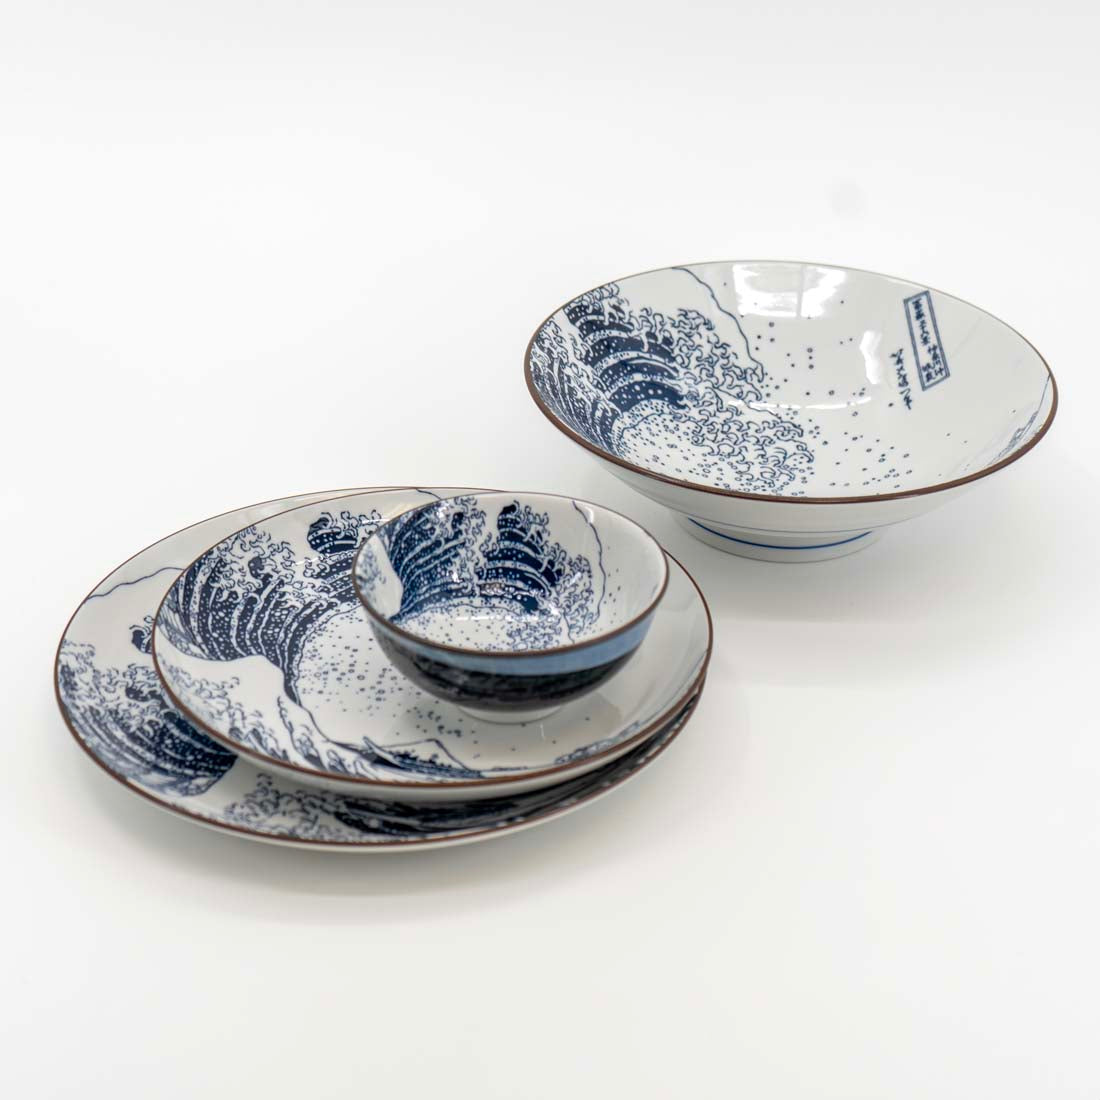 The Great Wave Ceramic Serving Bowl